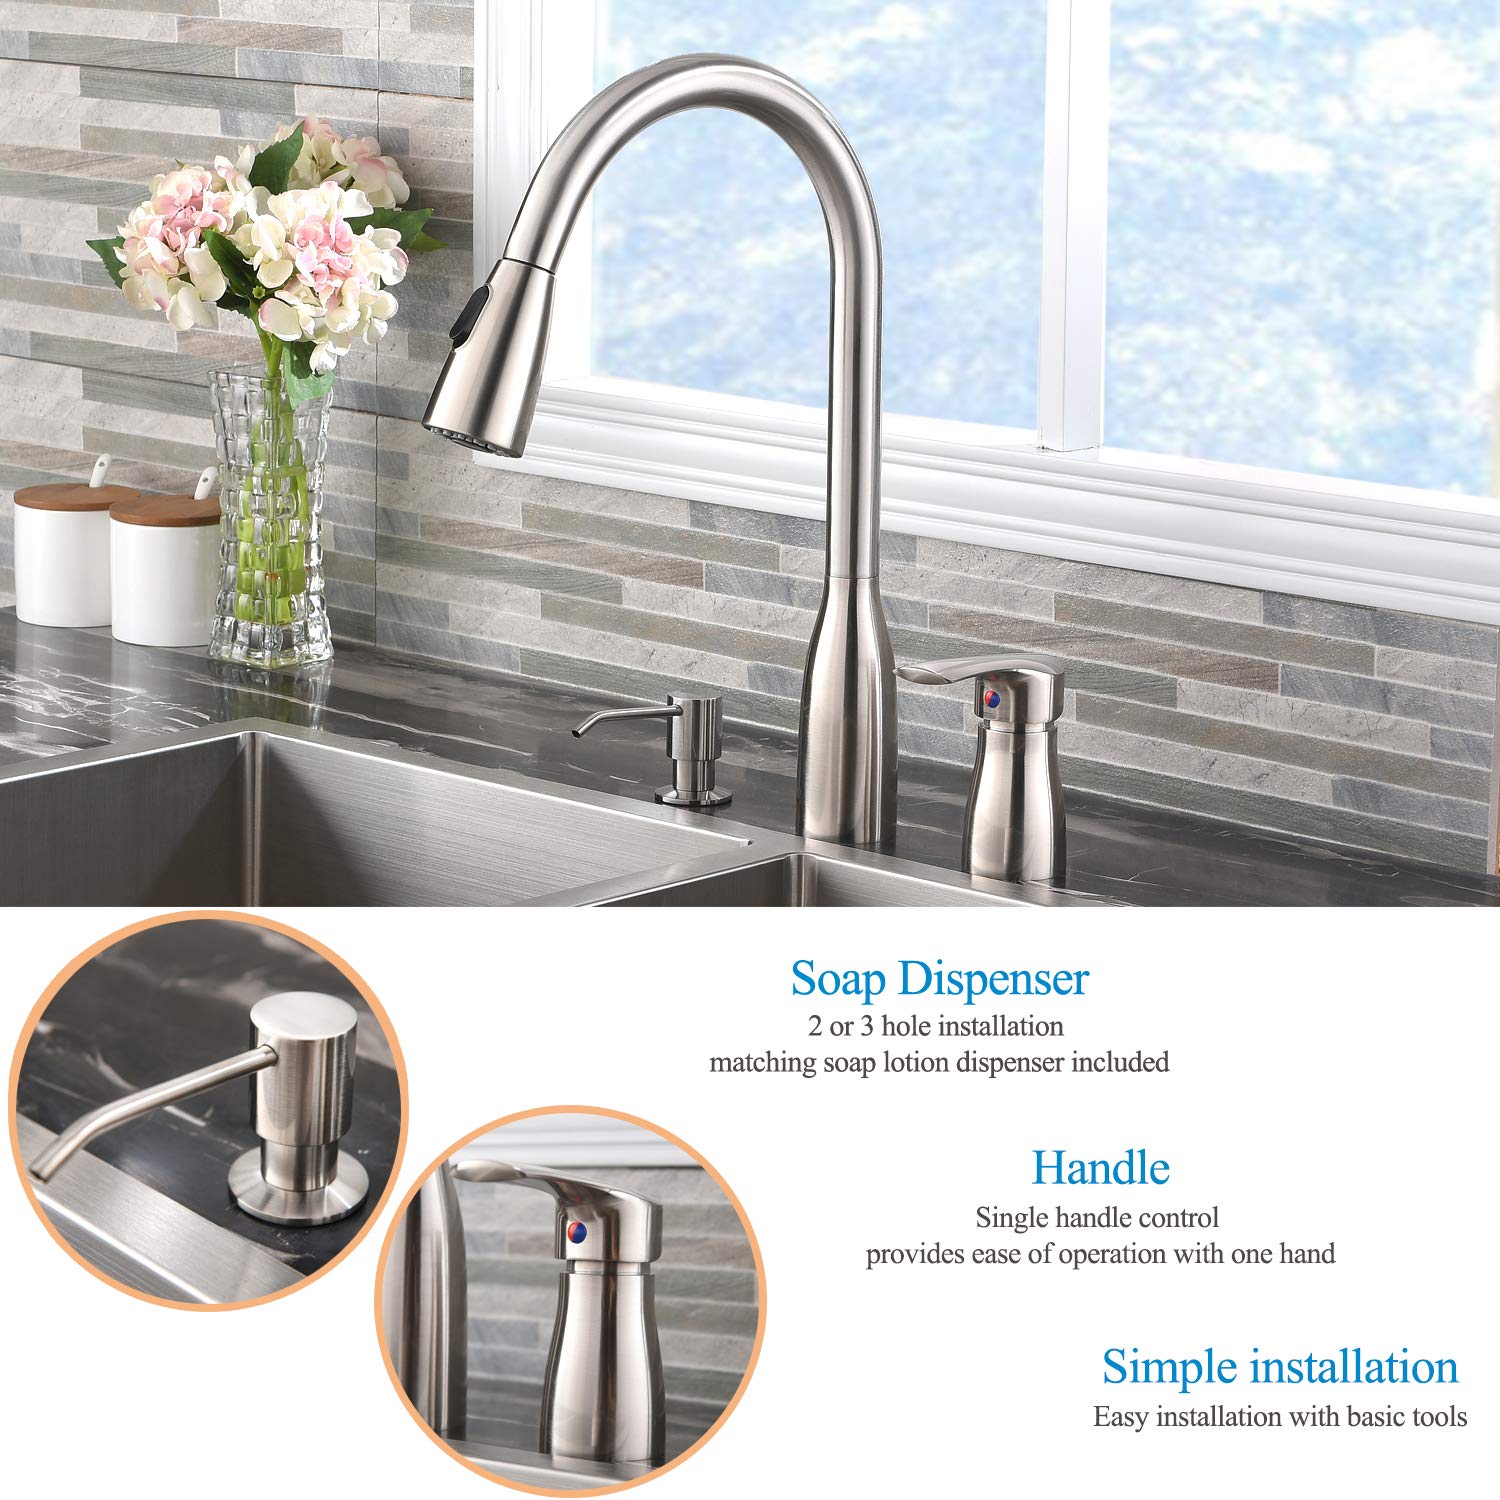 Hotis Kitchen faucets for Sink 3 Hole, Kitchen Faucet with Pull Down Sprayer, 2 Hole Kitchen Faucet Set Stainless Steel Single Handle, Brushed Nickel with Side Single Handle and Soap Dispenser